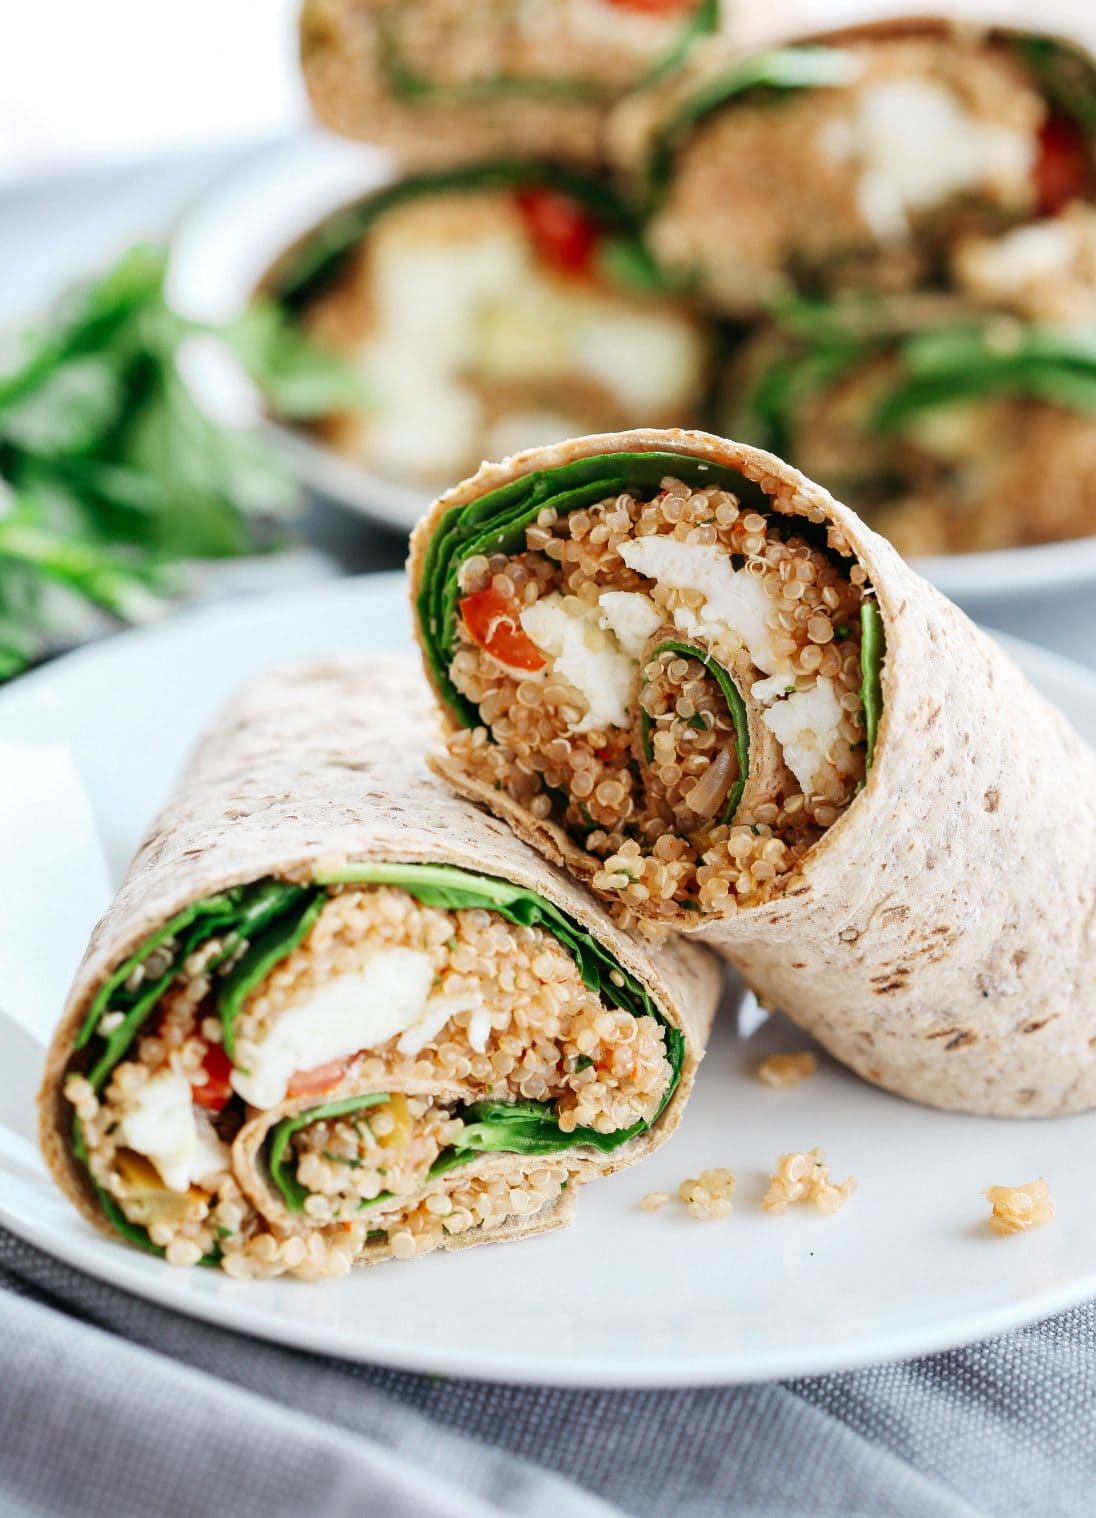 Quinoa egg and white breakfast wraps with cabbage